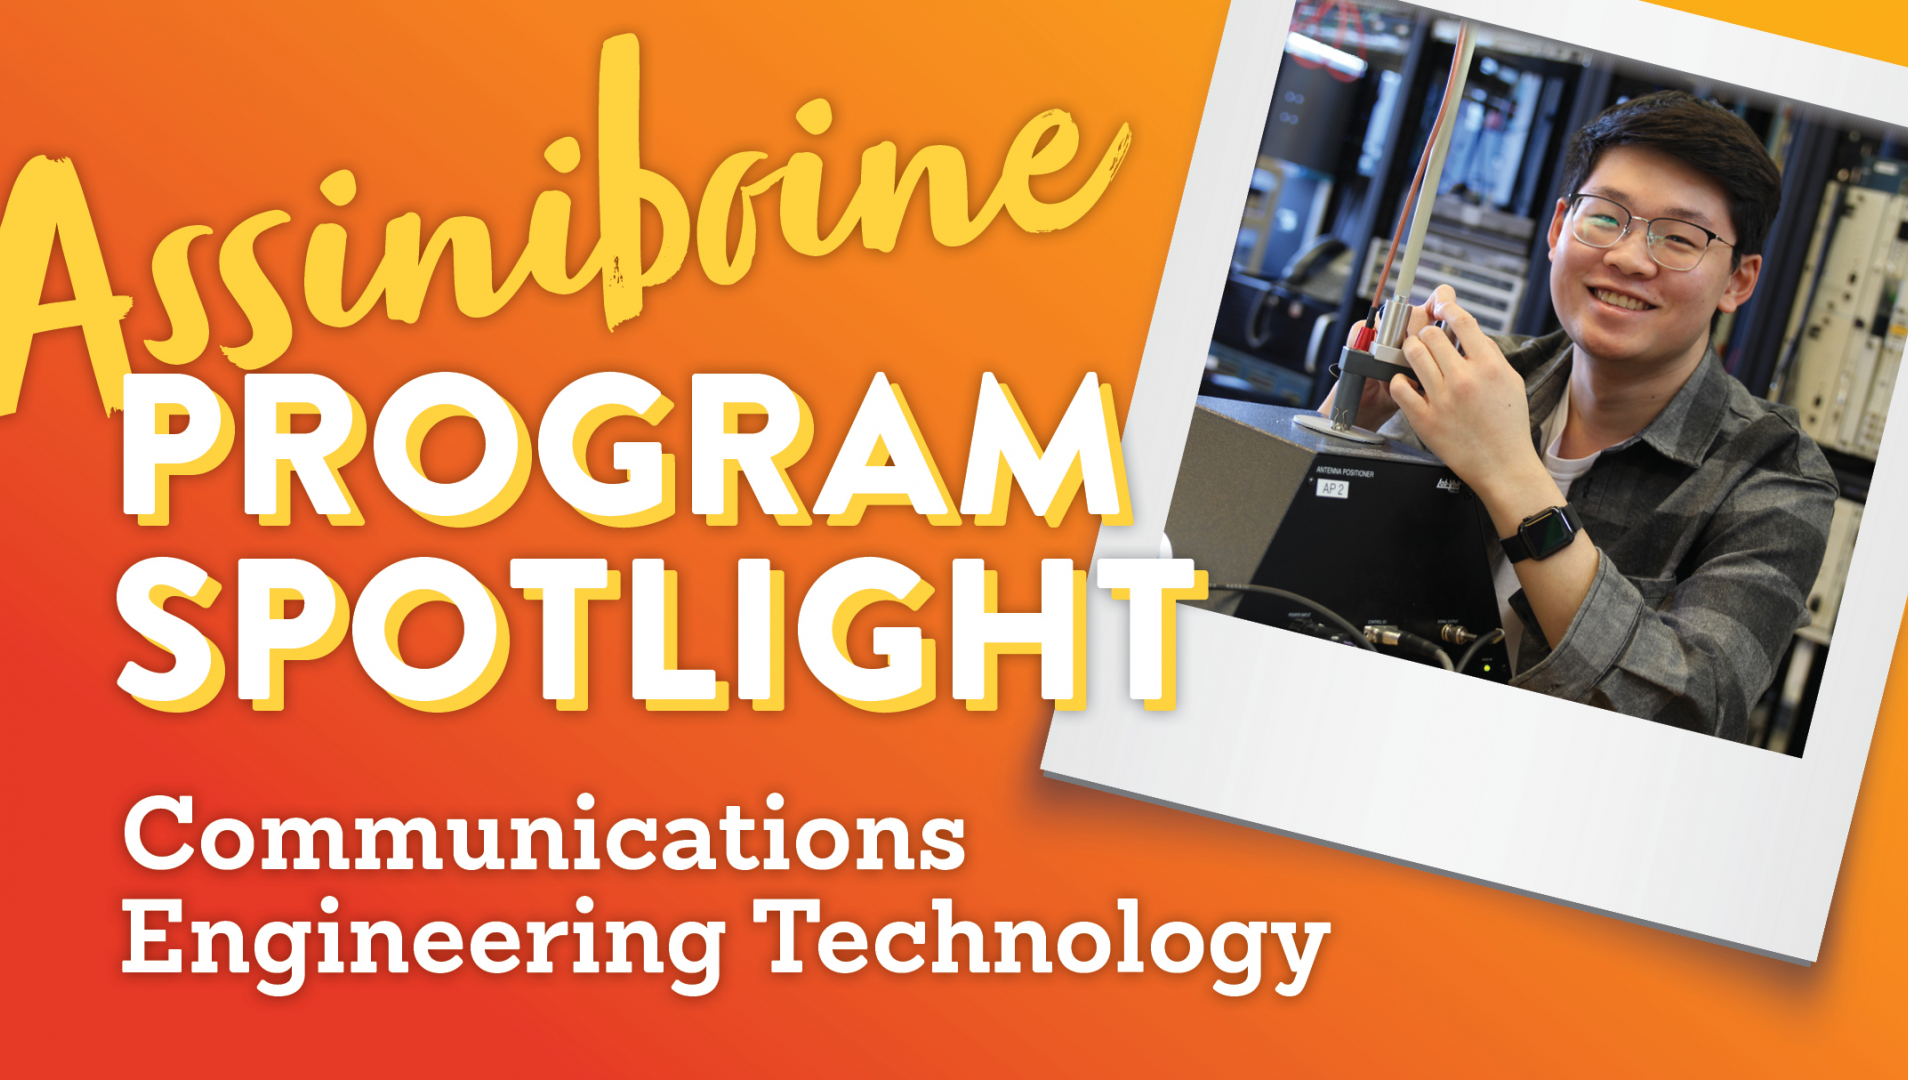 Program Spotlight: Connecting Our World with Communications Engineering Technology